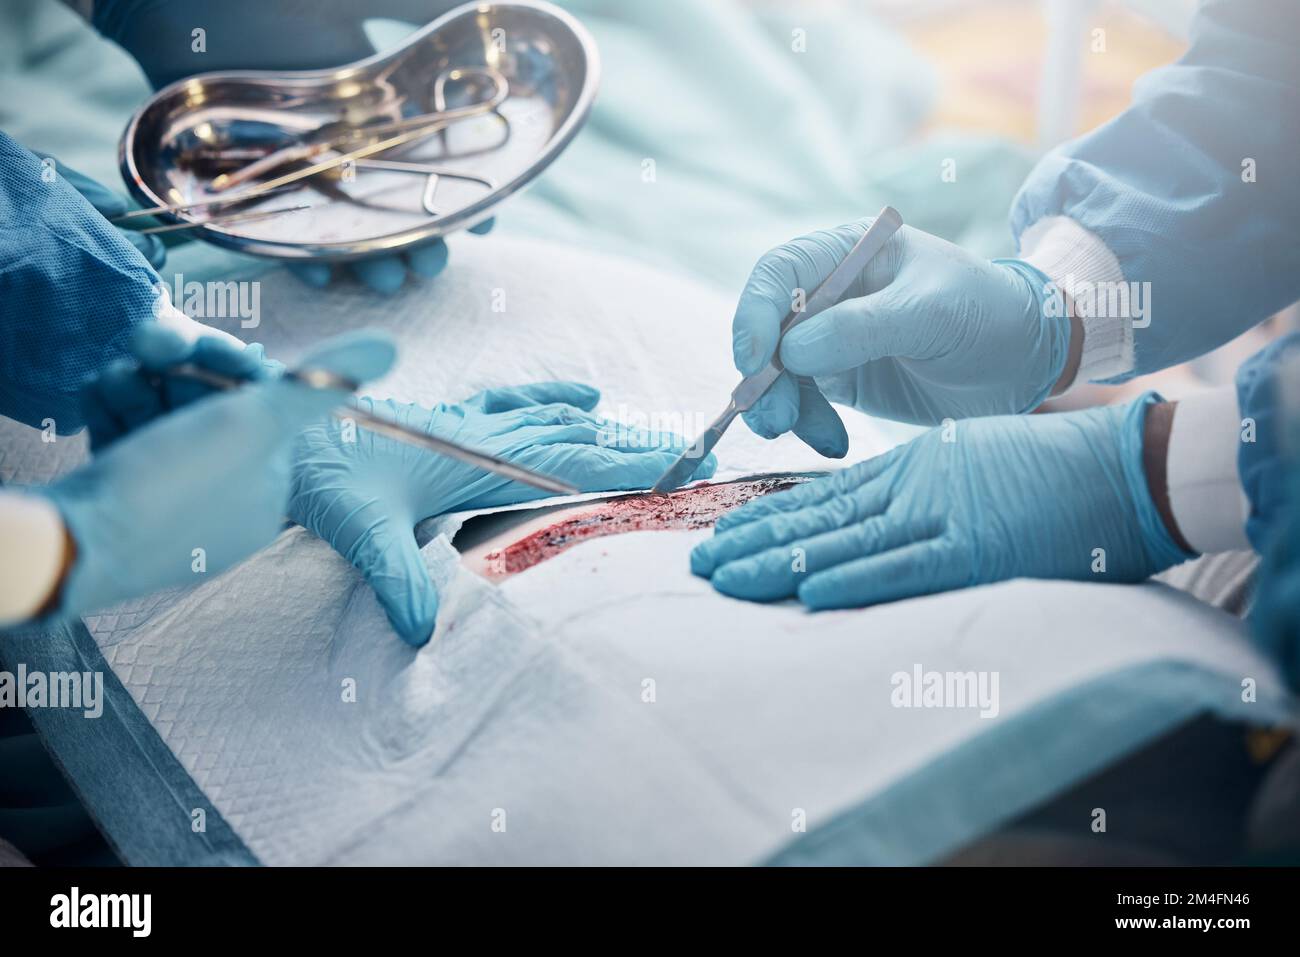 Doctors, nurses or surgery hands on cut patient in hospital emergency room for stomach ulcer, heart attack or burst appendix. Zoom, healthcare workers Stock Photo